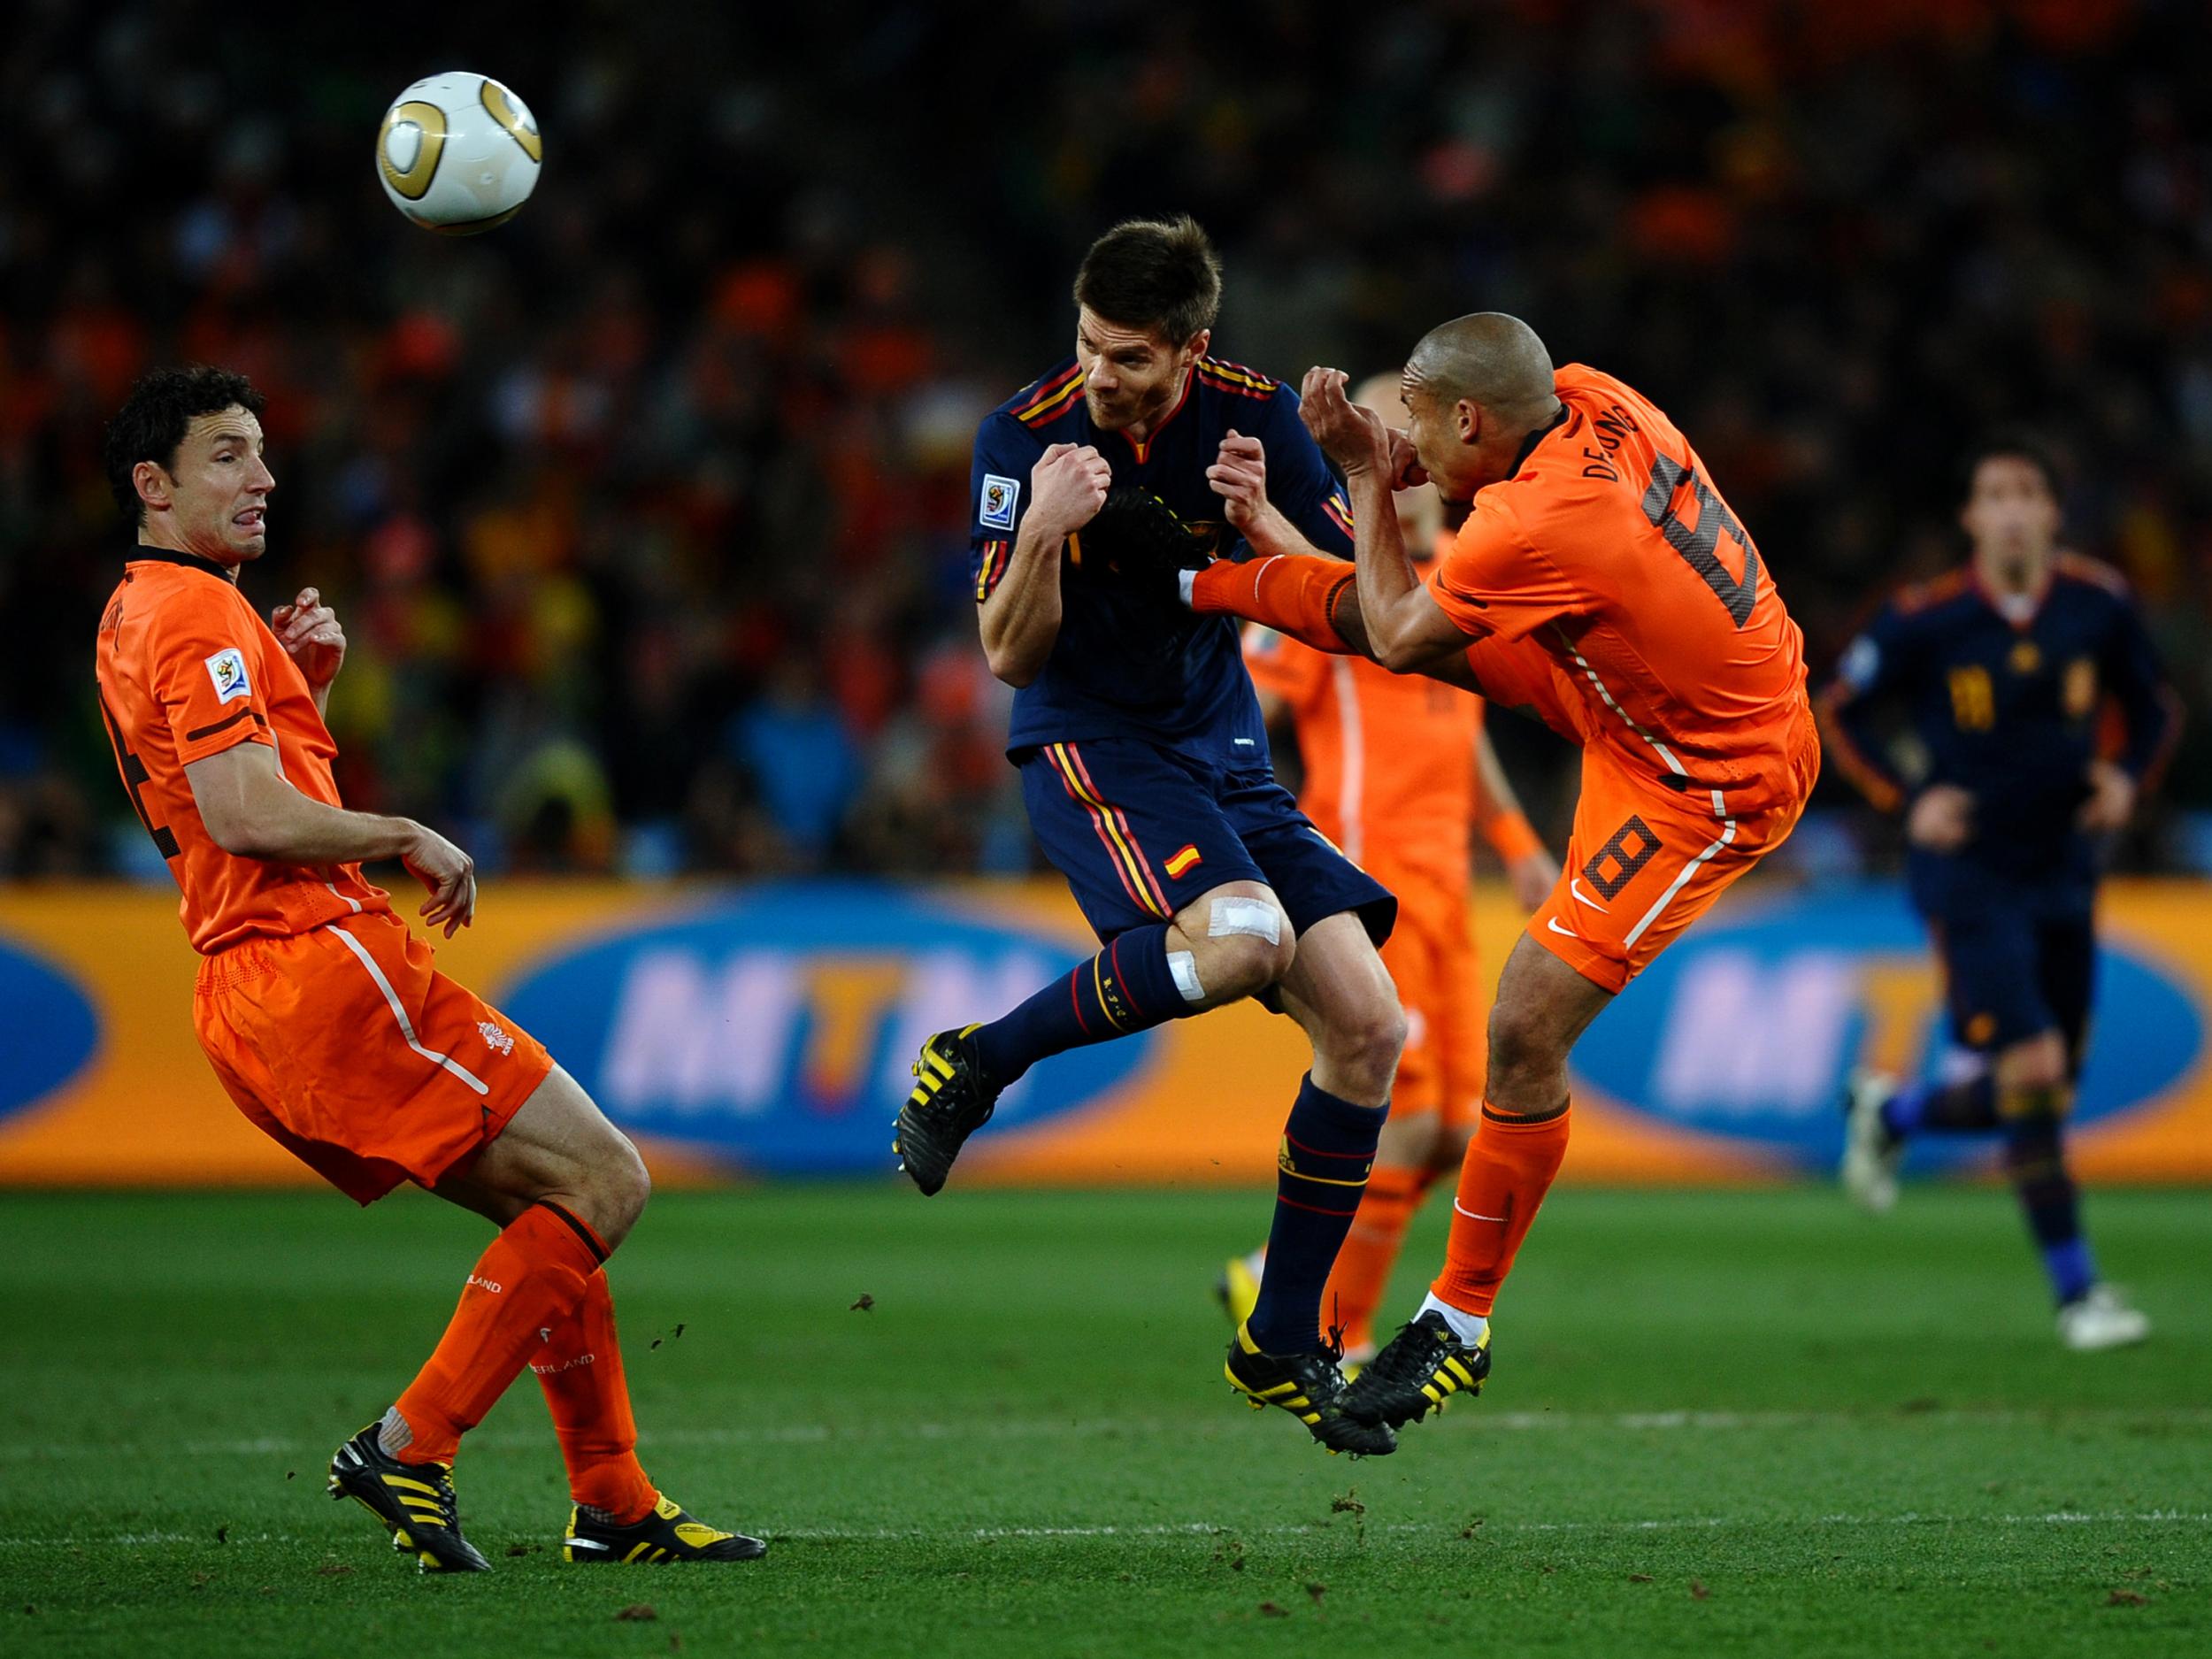 Holland were forced to resort to kicking Spain in the 2010 World Cup final